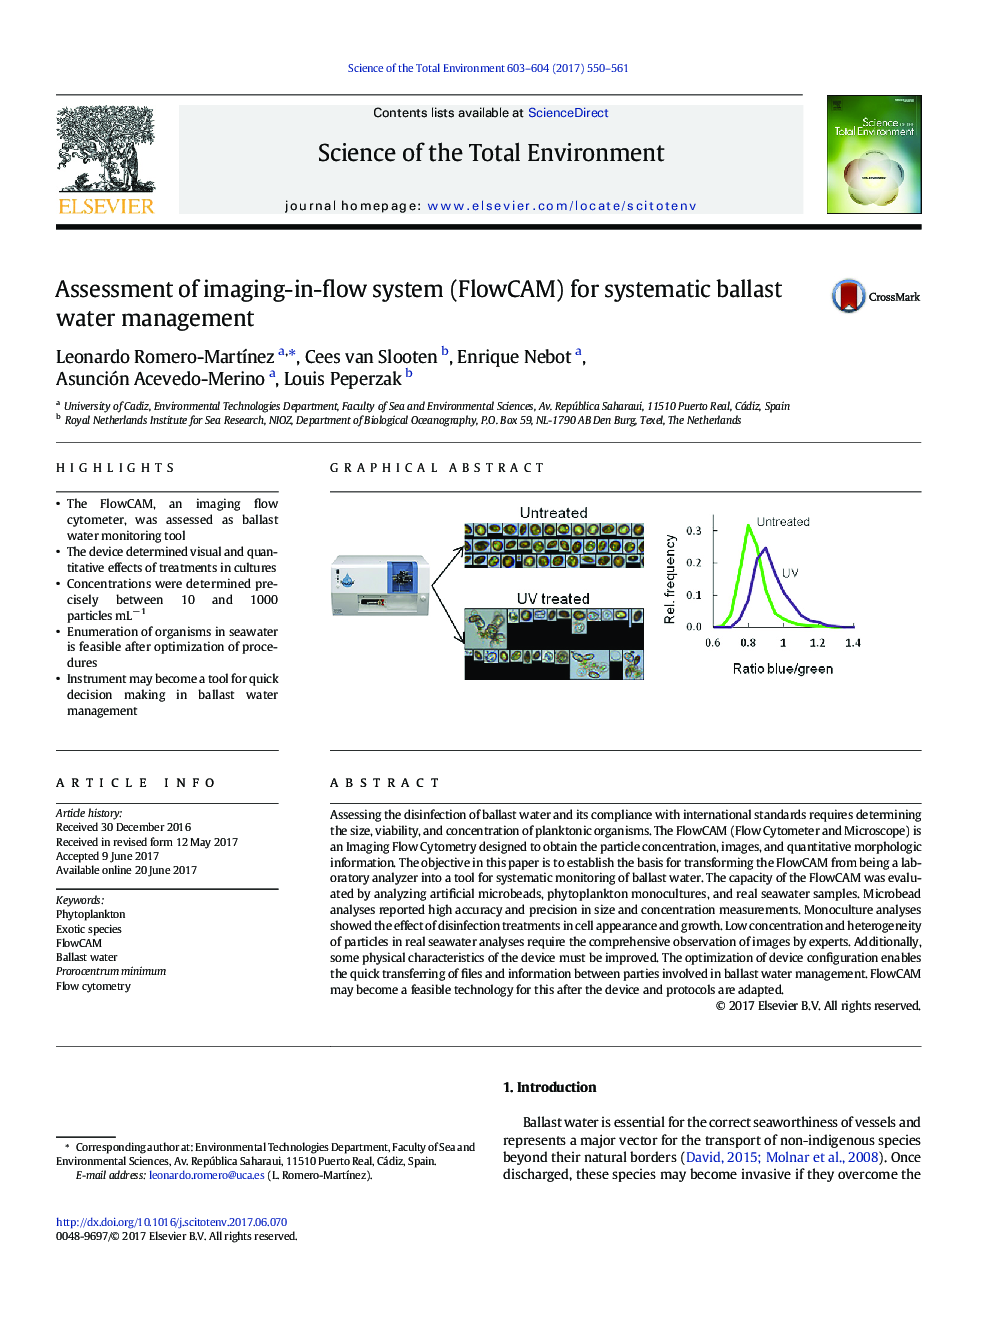 Assessment of imaging-in-flow system (FlowCAM) for systematic ballast water management